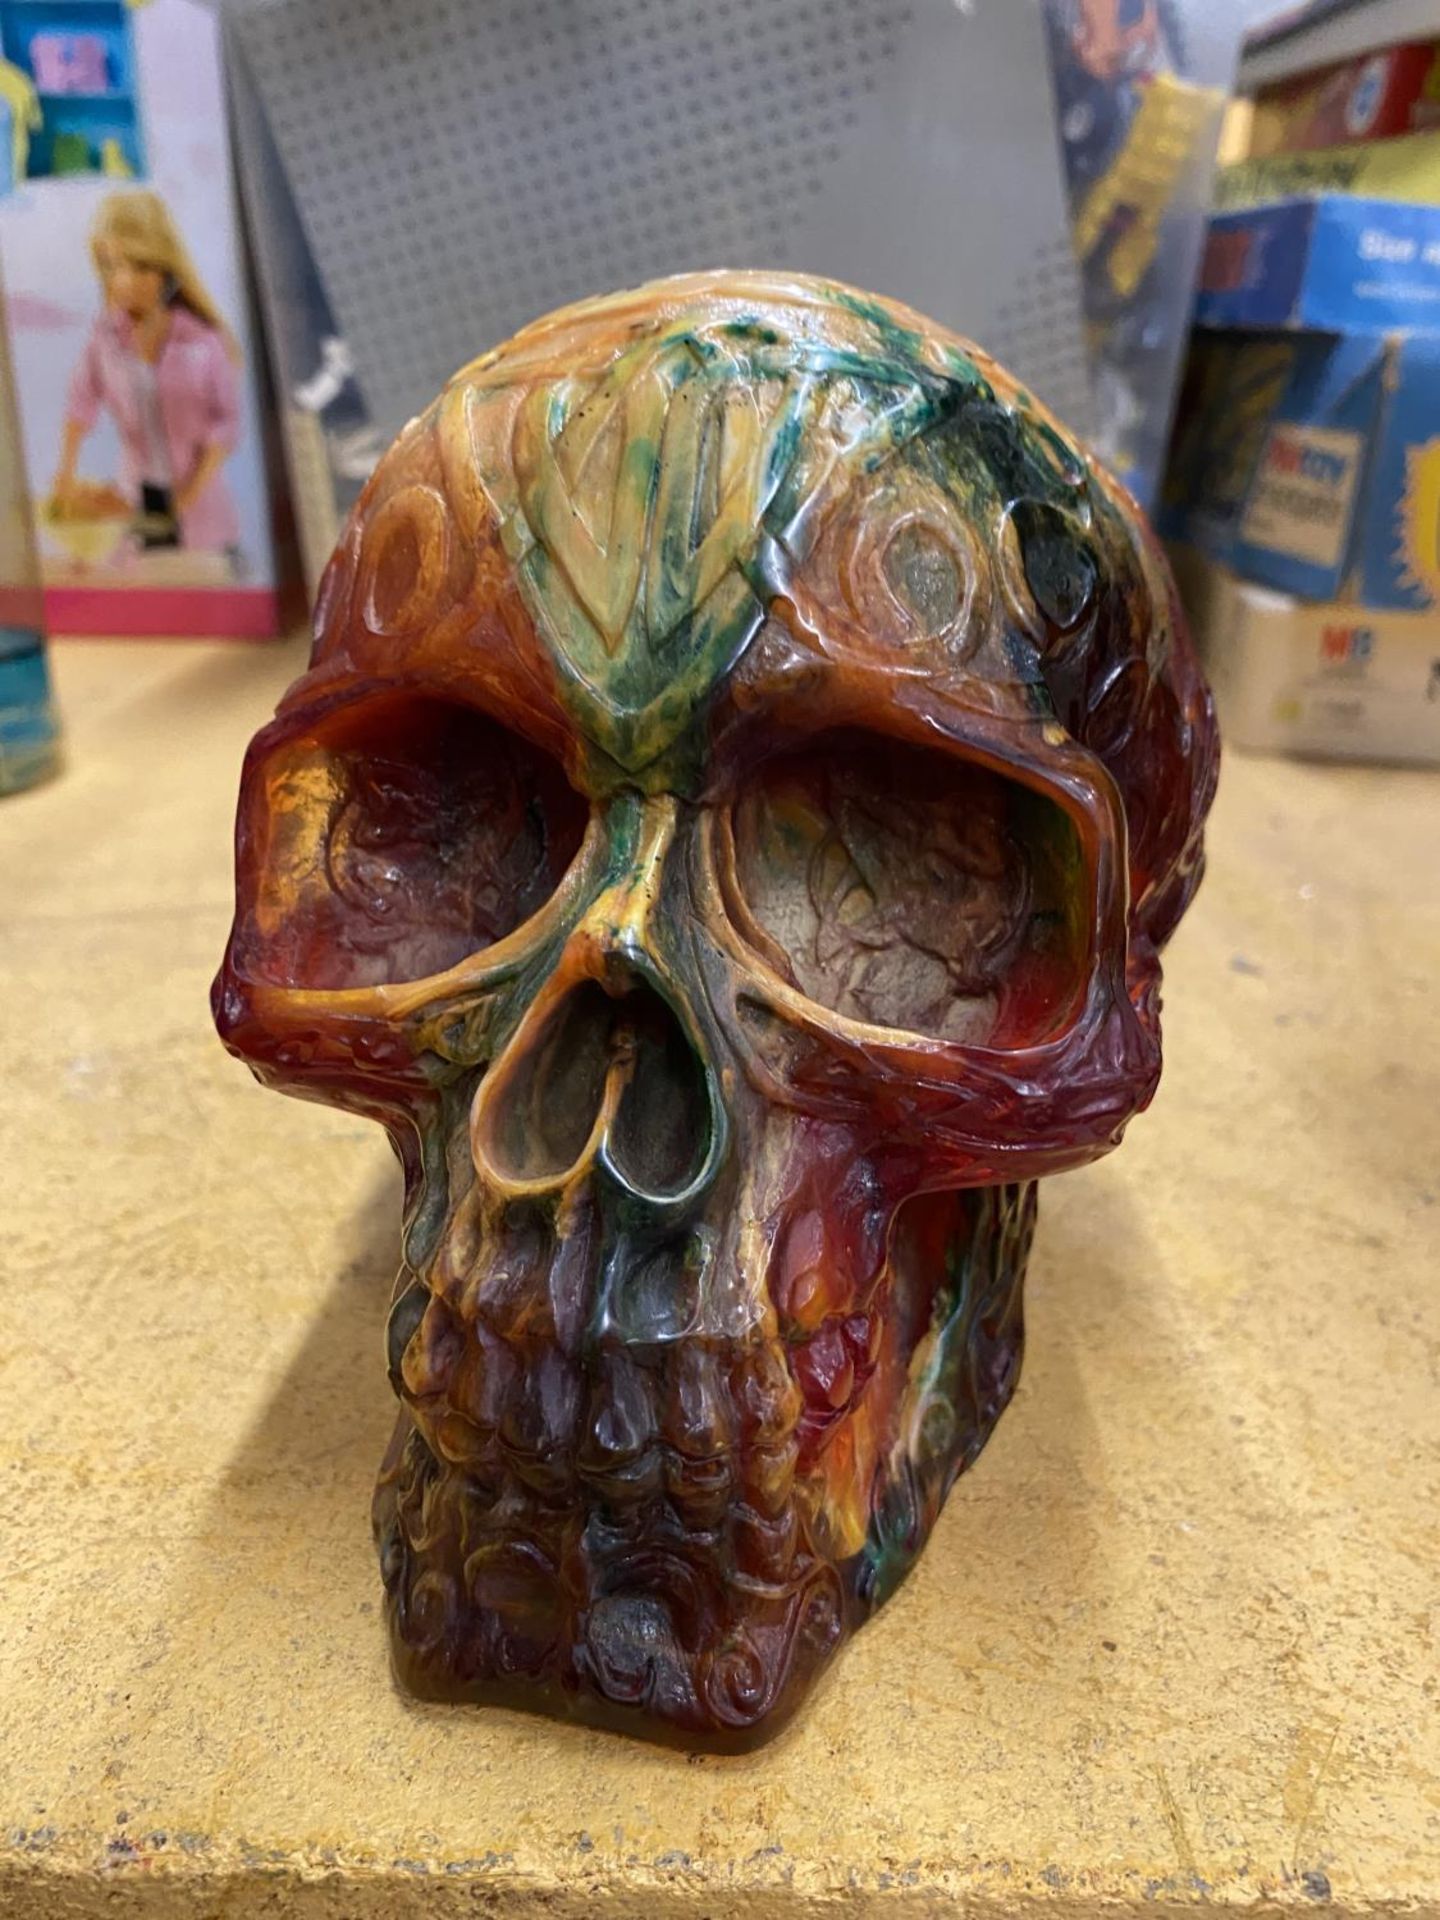 A COLLECTABLE RESIN MODEL OF A SKULL